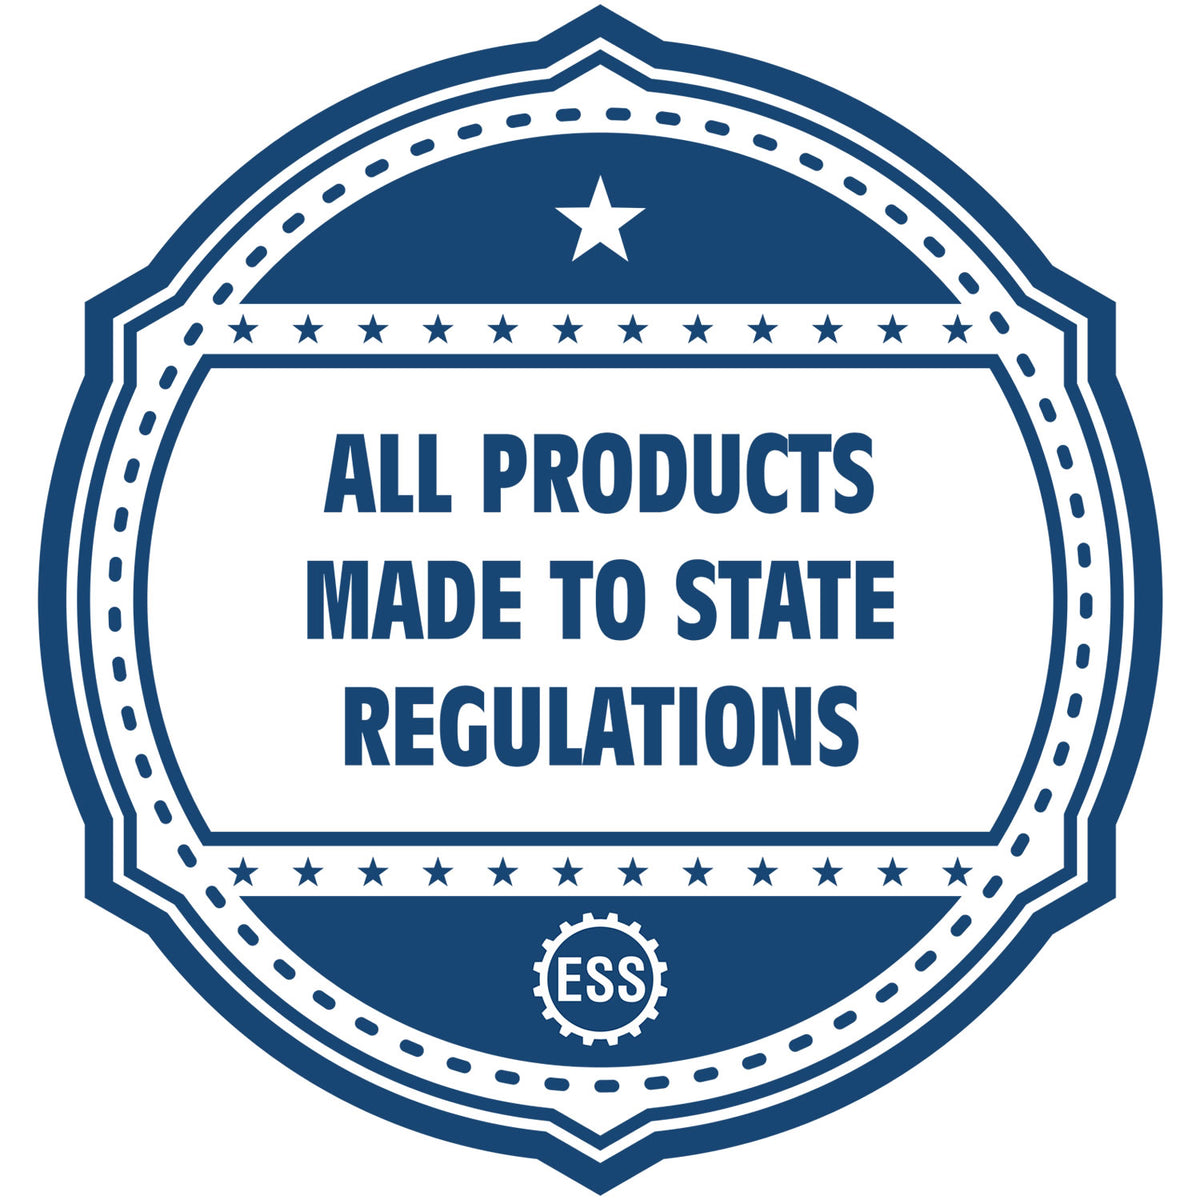 An icon or badge element for the Heavy-Duty New Jersey Rectangular Notary Stamp showing that this product is made in compliance with state regulations.